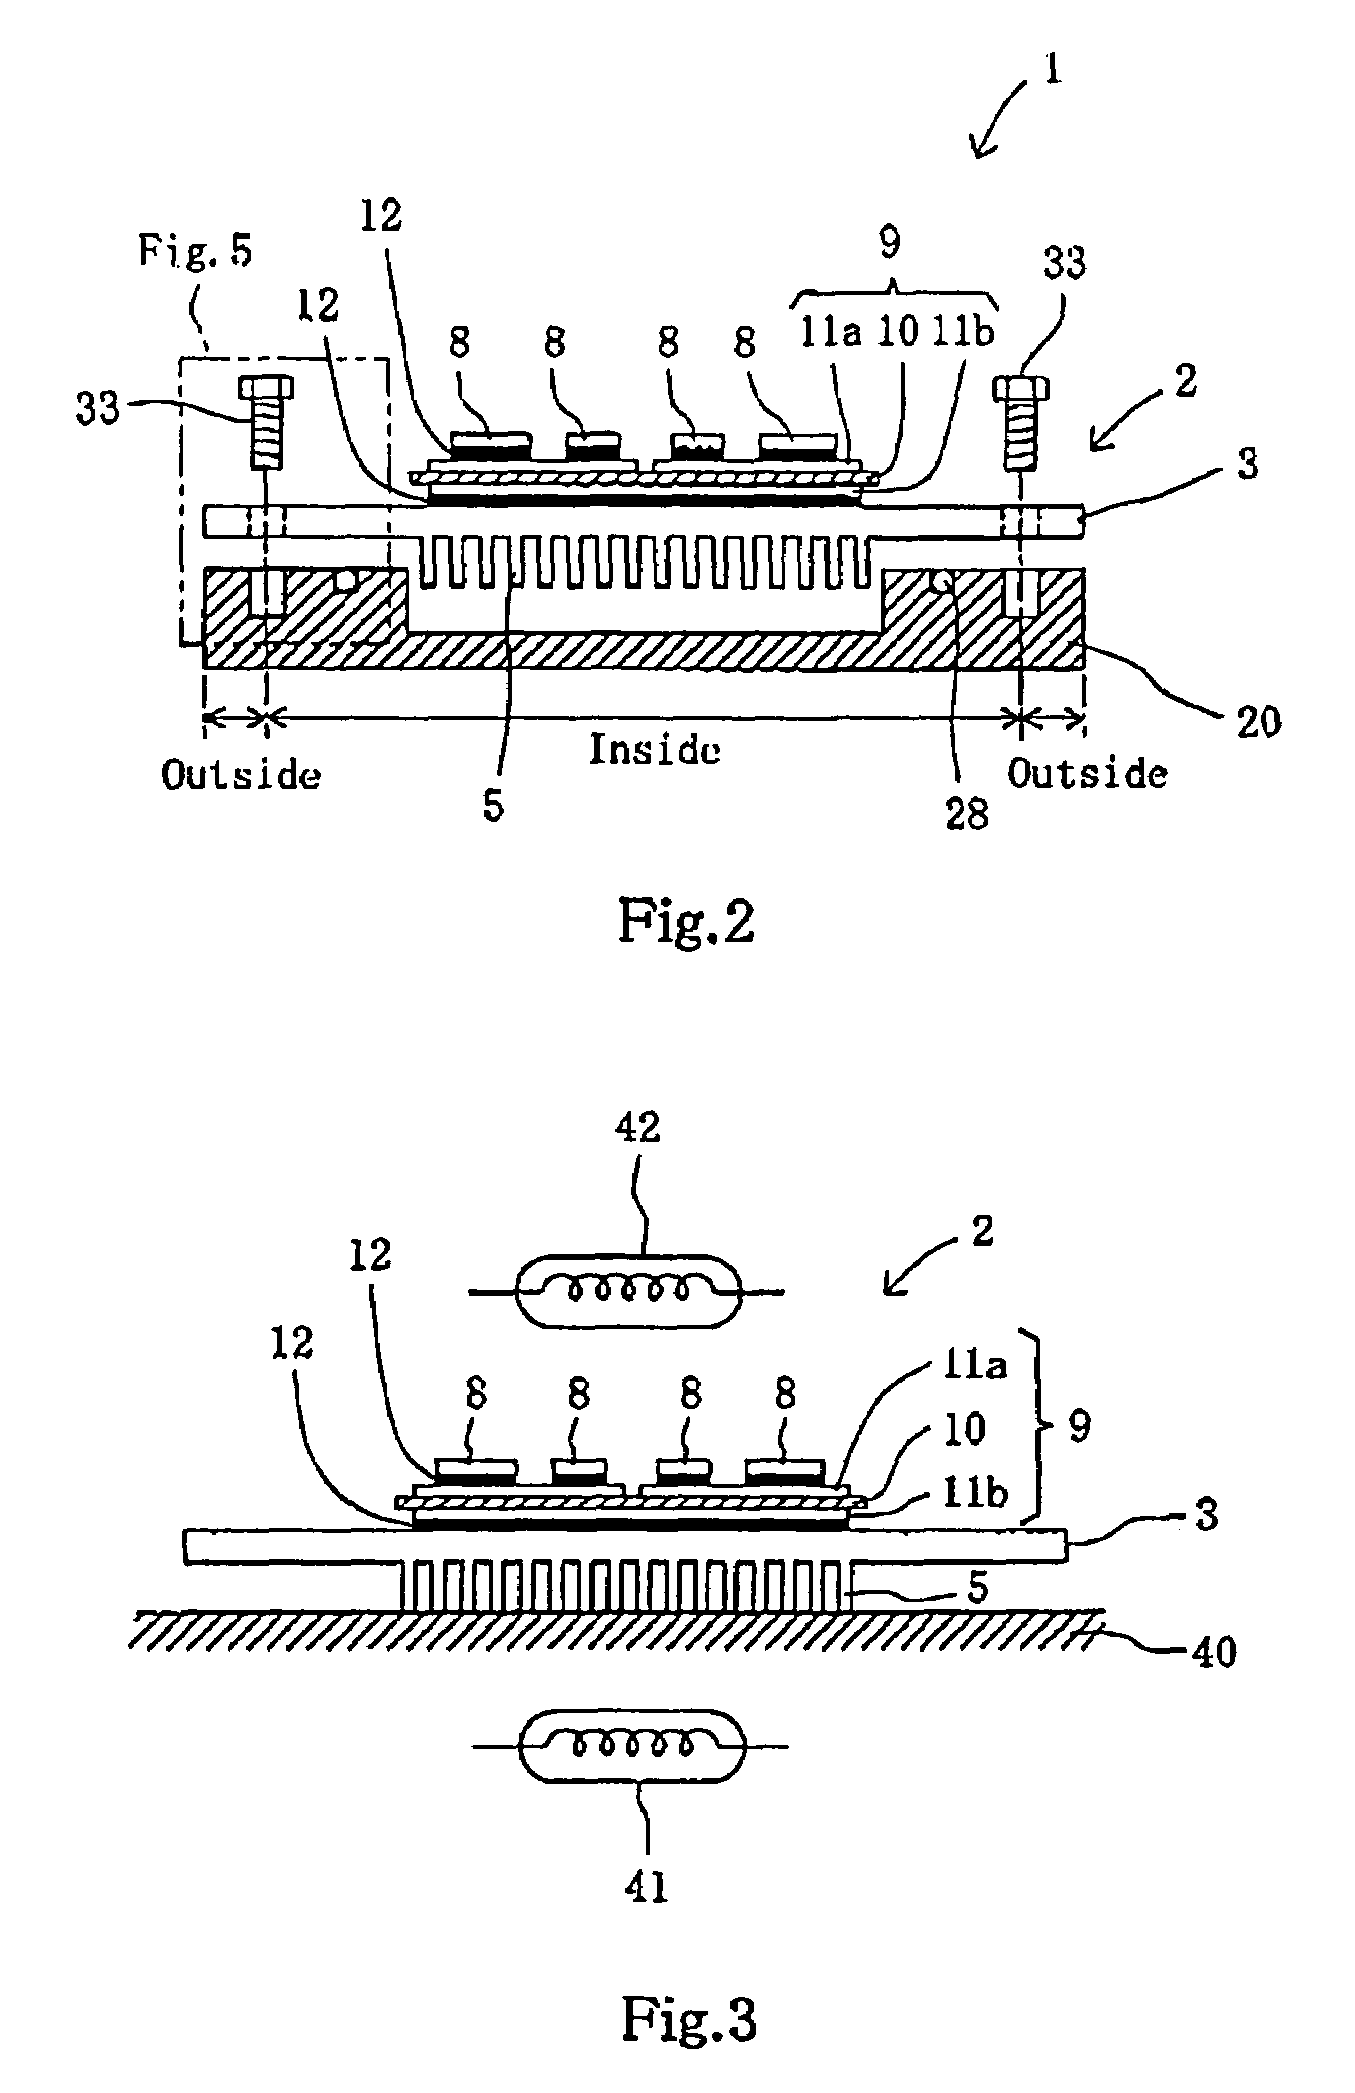 Power semiconductor module, and power semiconductor device having the module mounted therein